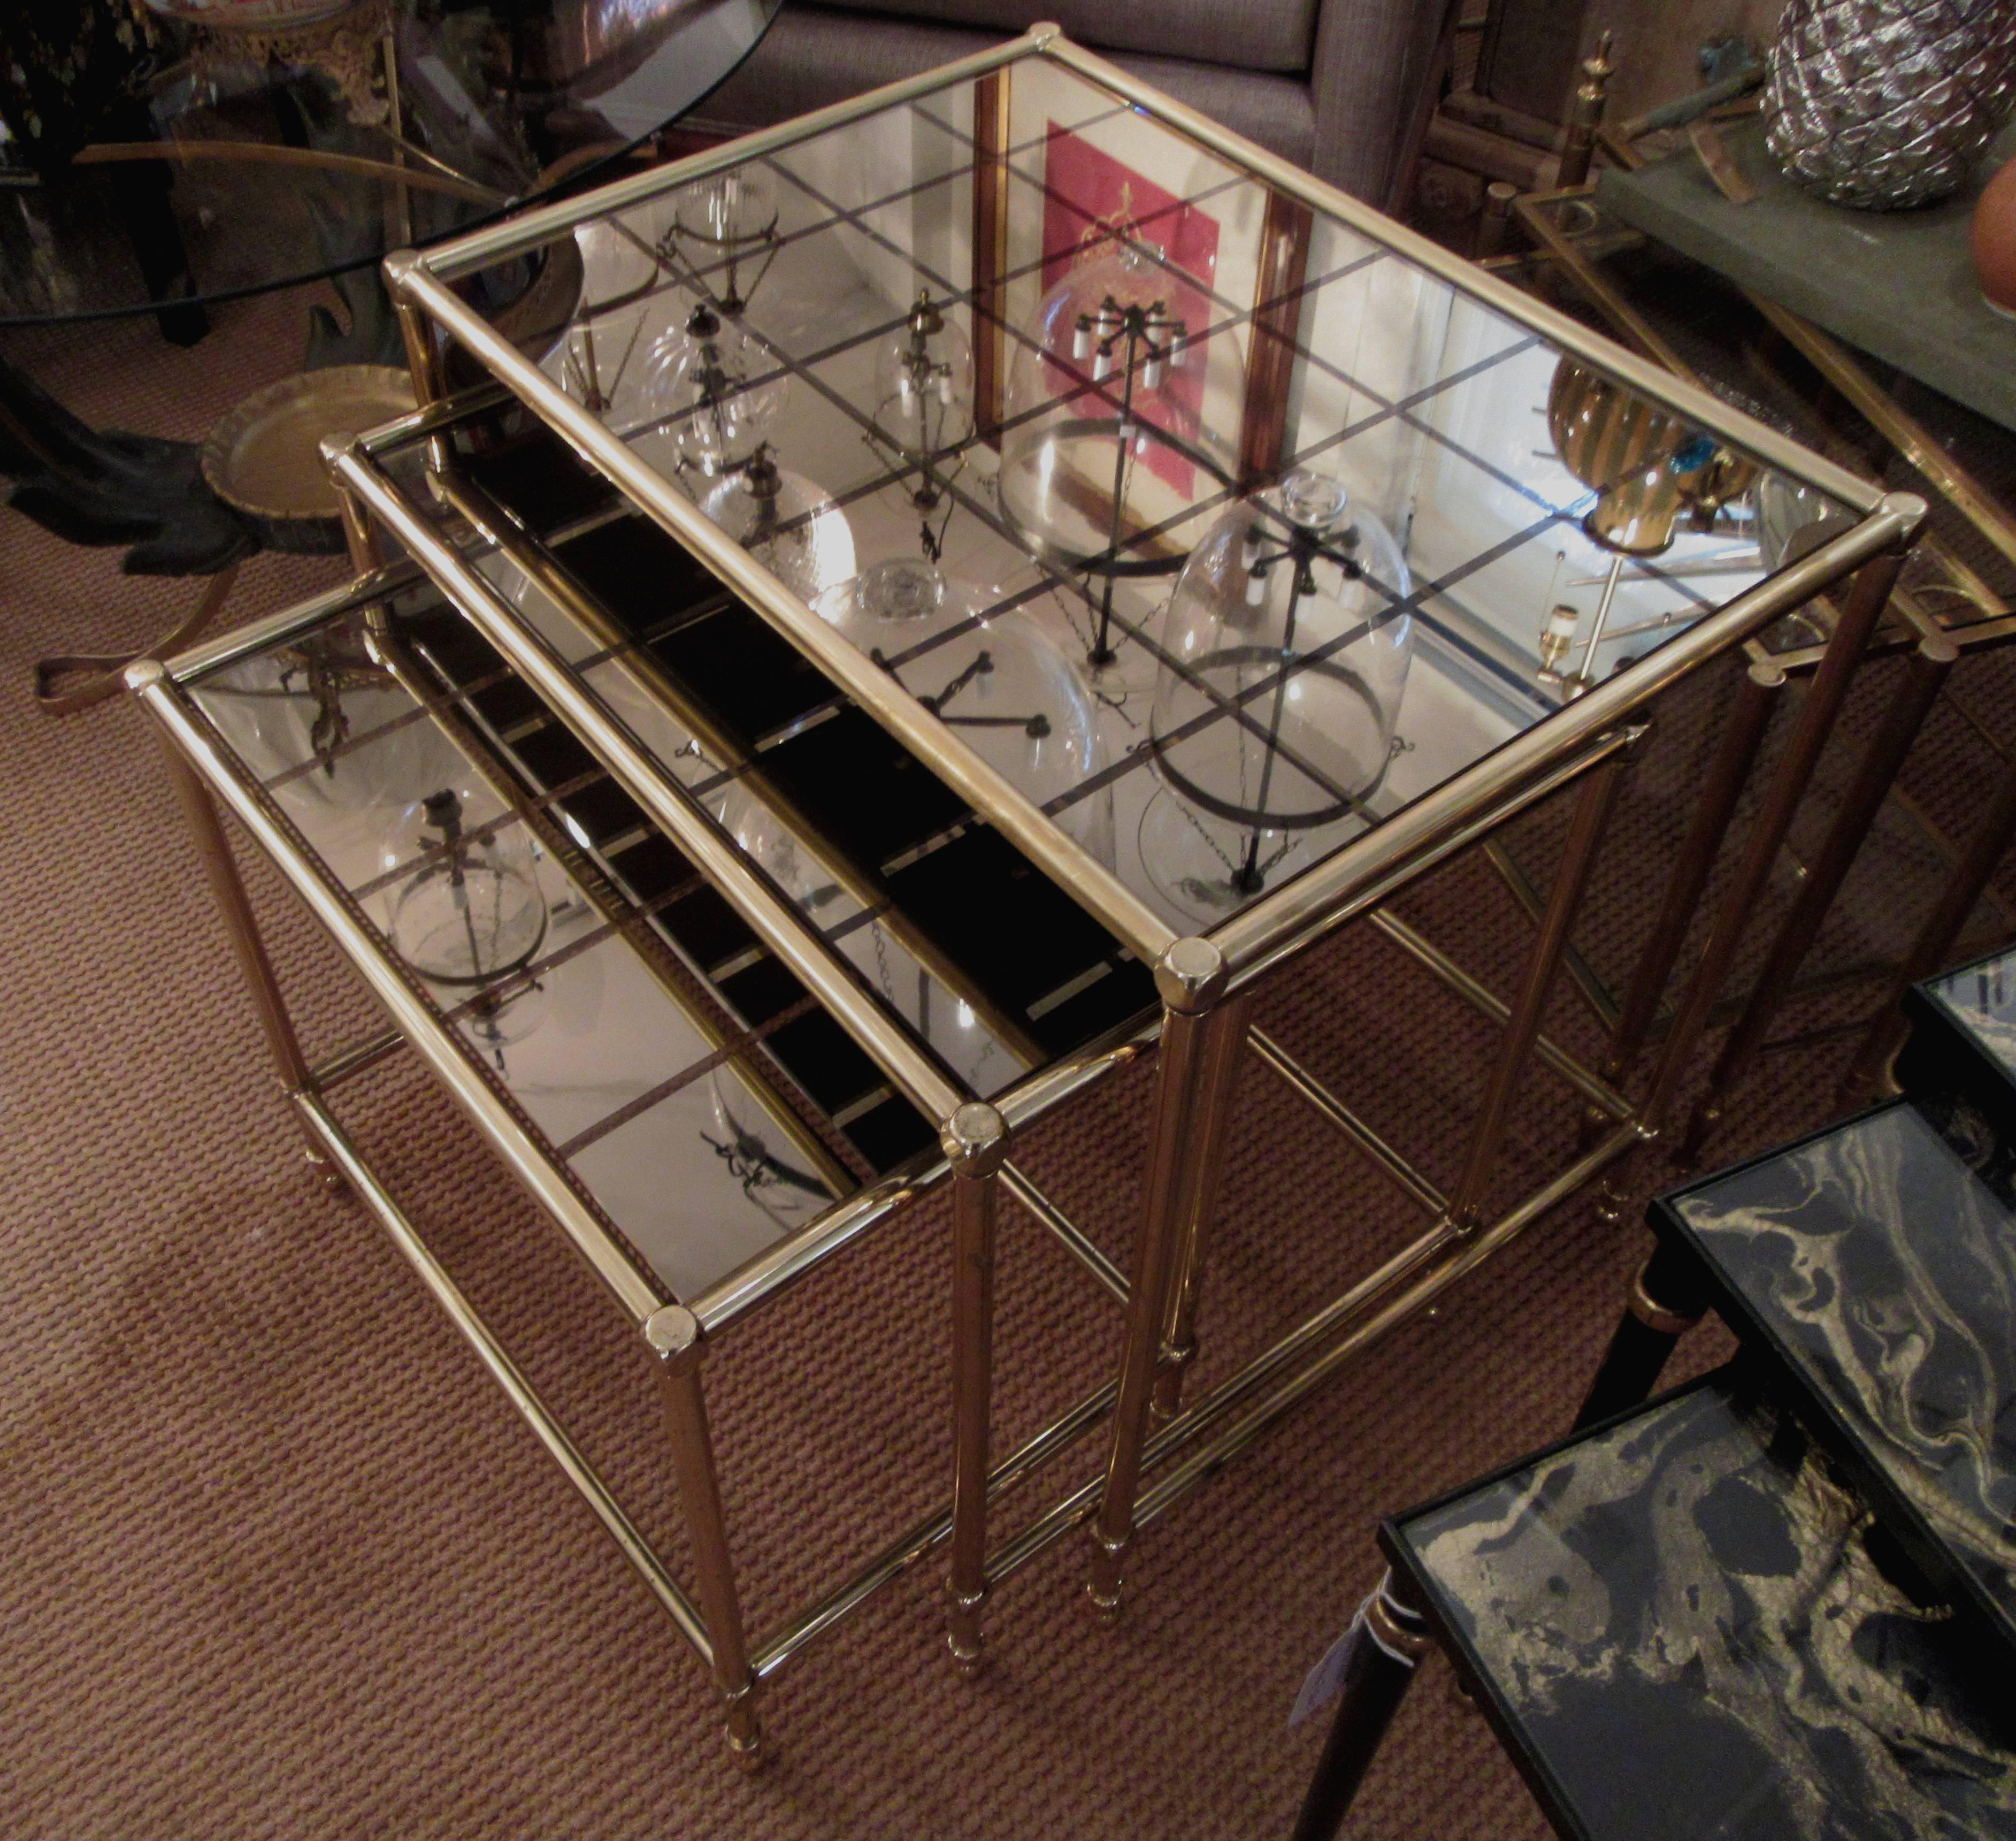 A set of three tubular brass nesting tables, inset with original grid design glass.
Mirrored squares are divided by smokey amber glass.